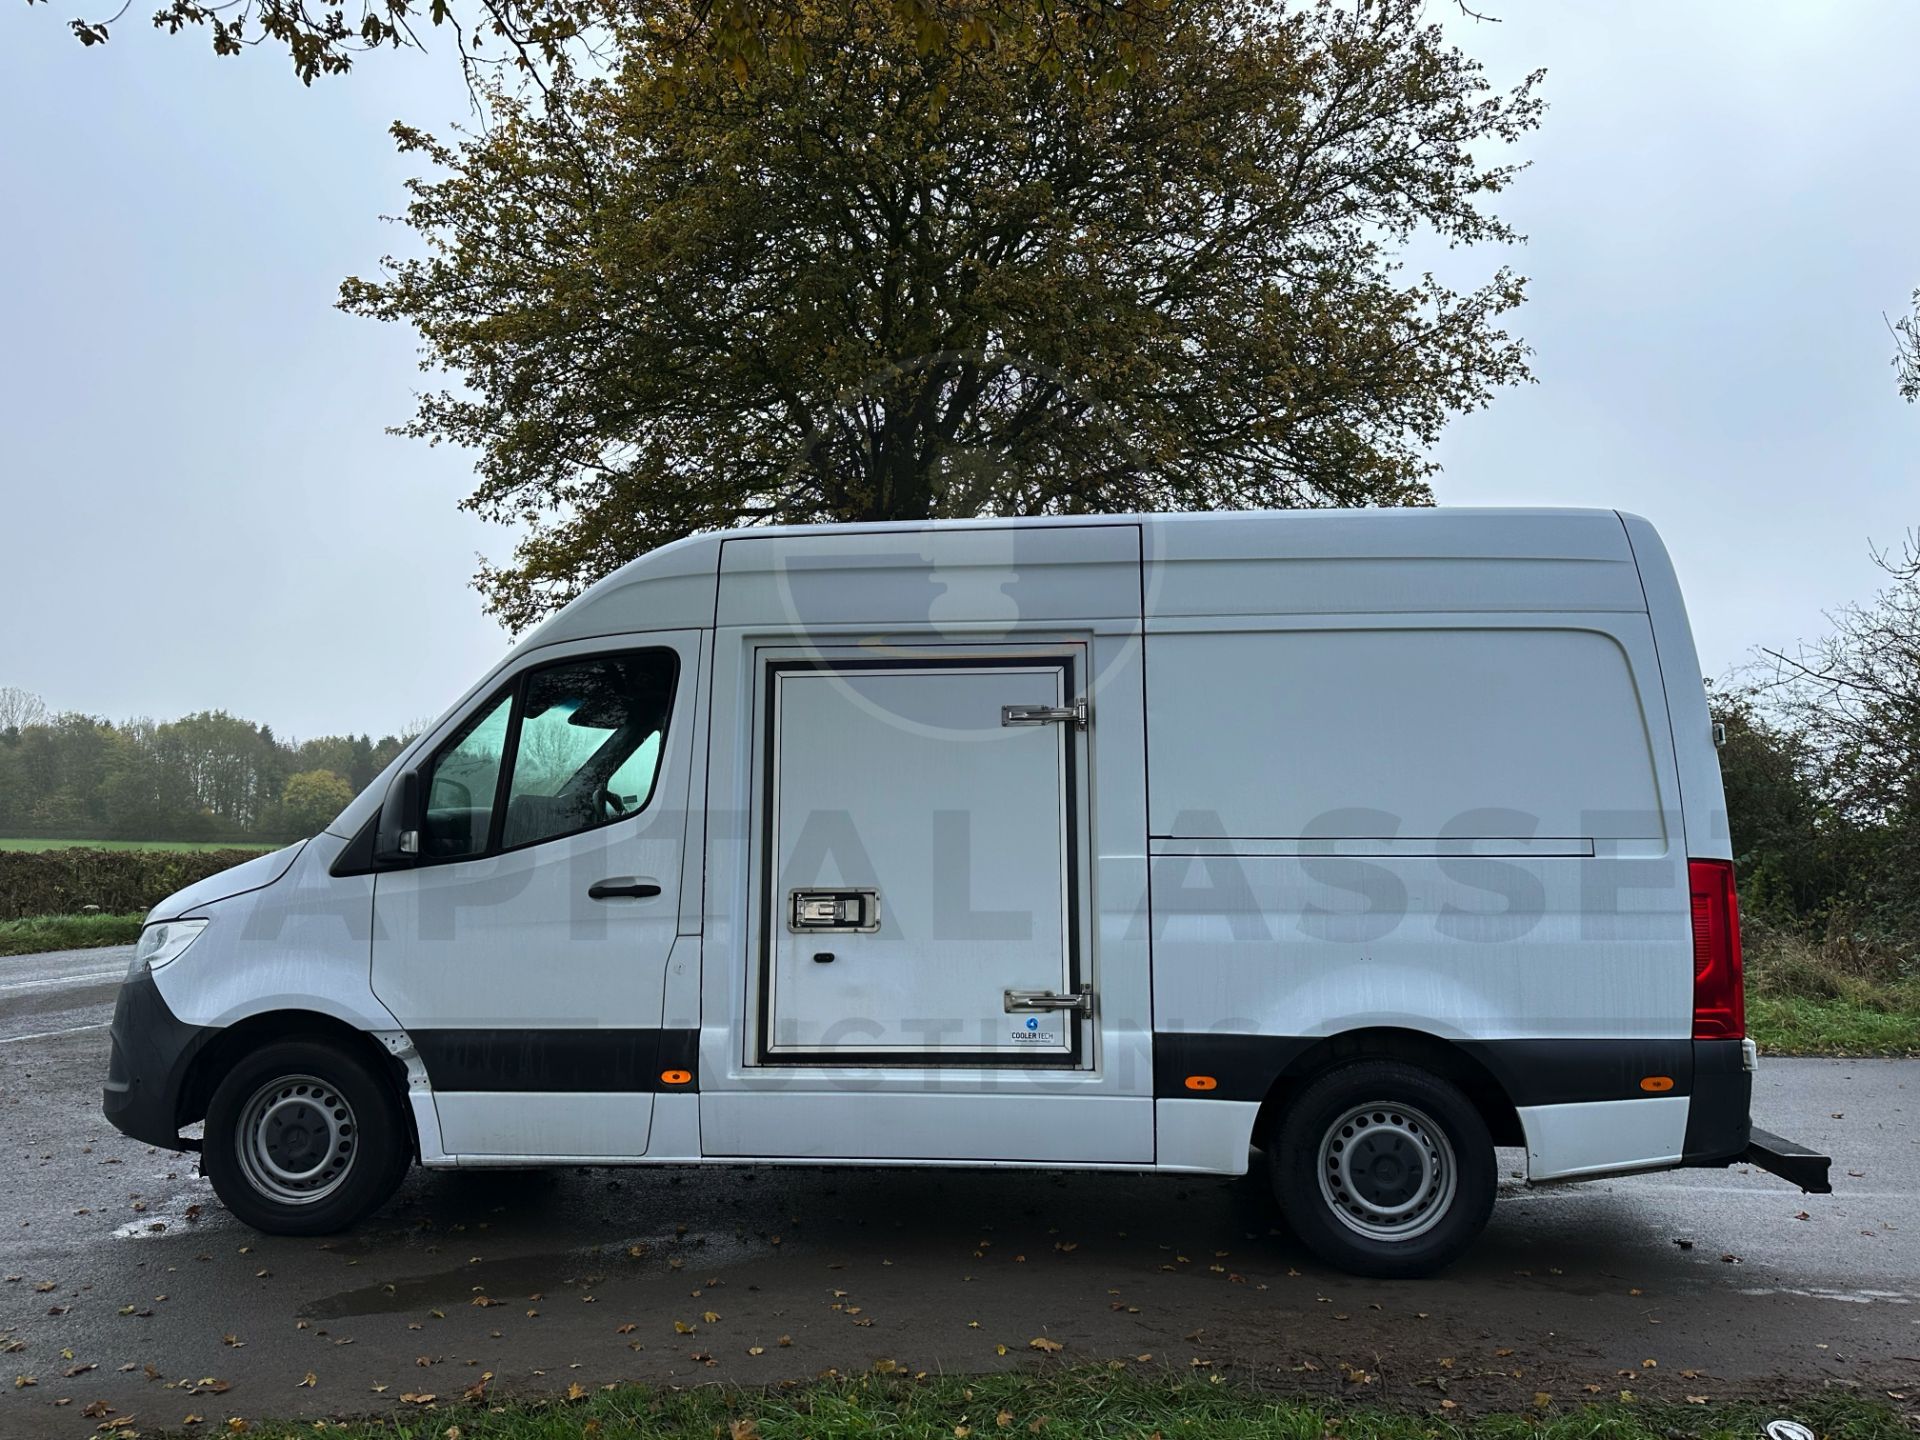 MERCEDES-BENZ SPRINTER 314 CDI *MWB - REFRIGERATED VAN* (2019 - FACELIFT MODEL) *OVERNIGHT STANDBY* - Image 10 of 45